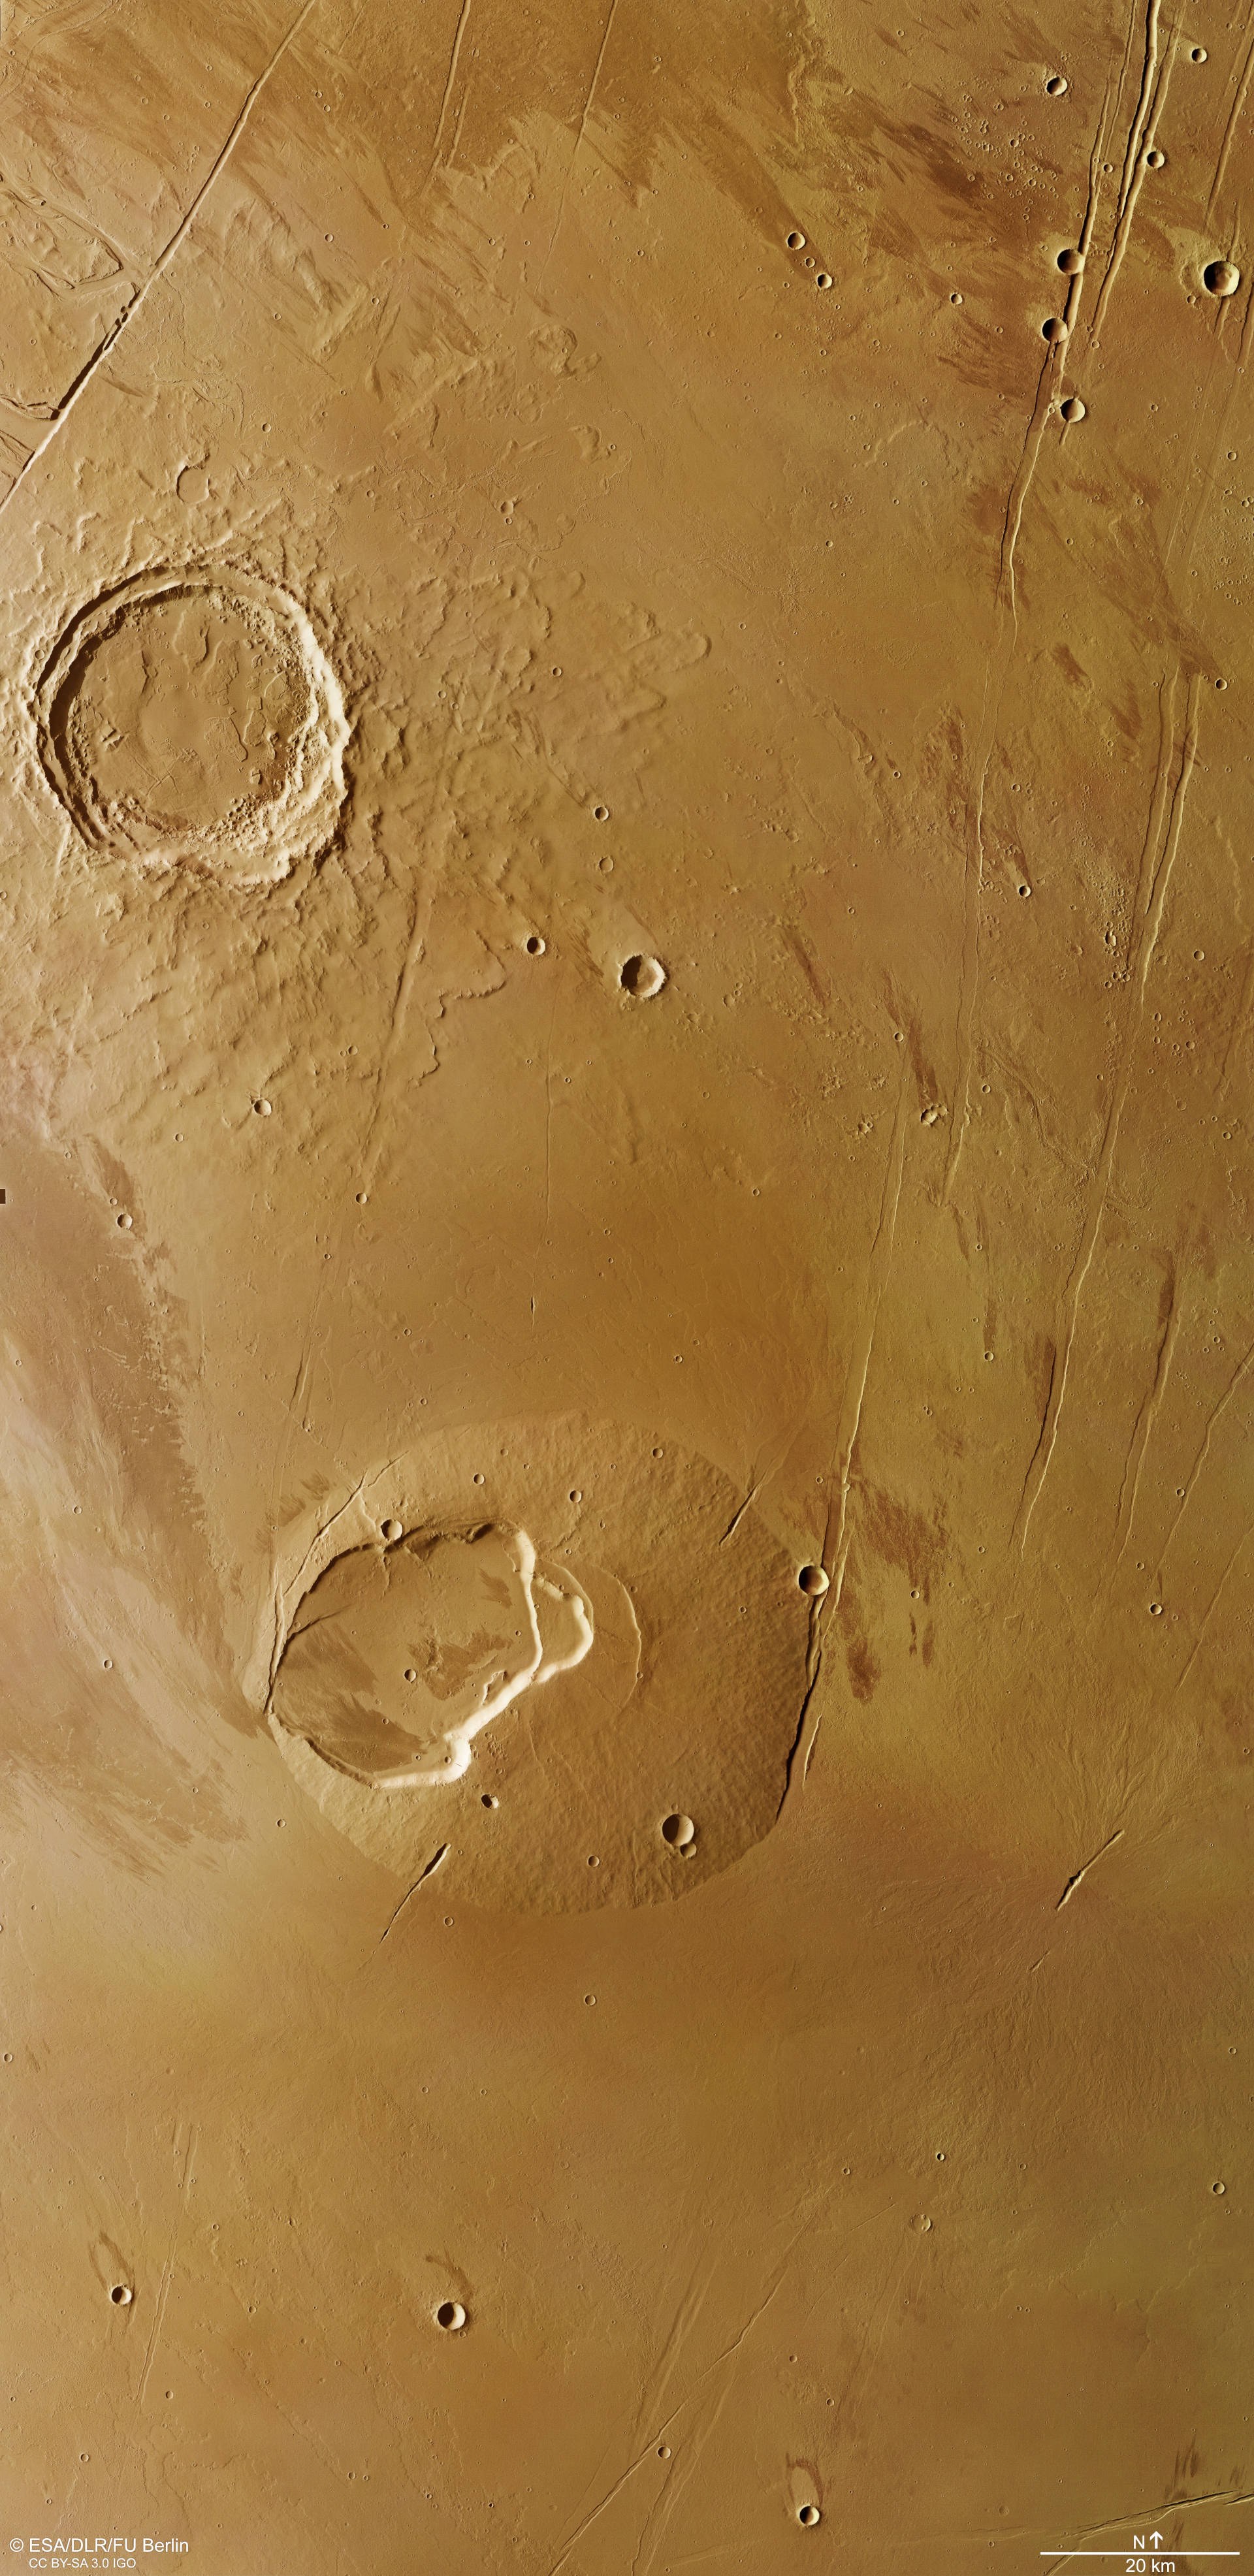 Perpendicular-view colour image of the Martian shield volcano Jovis Tholus